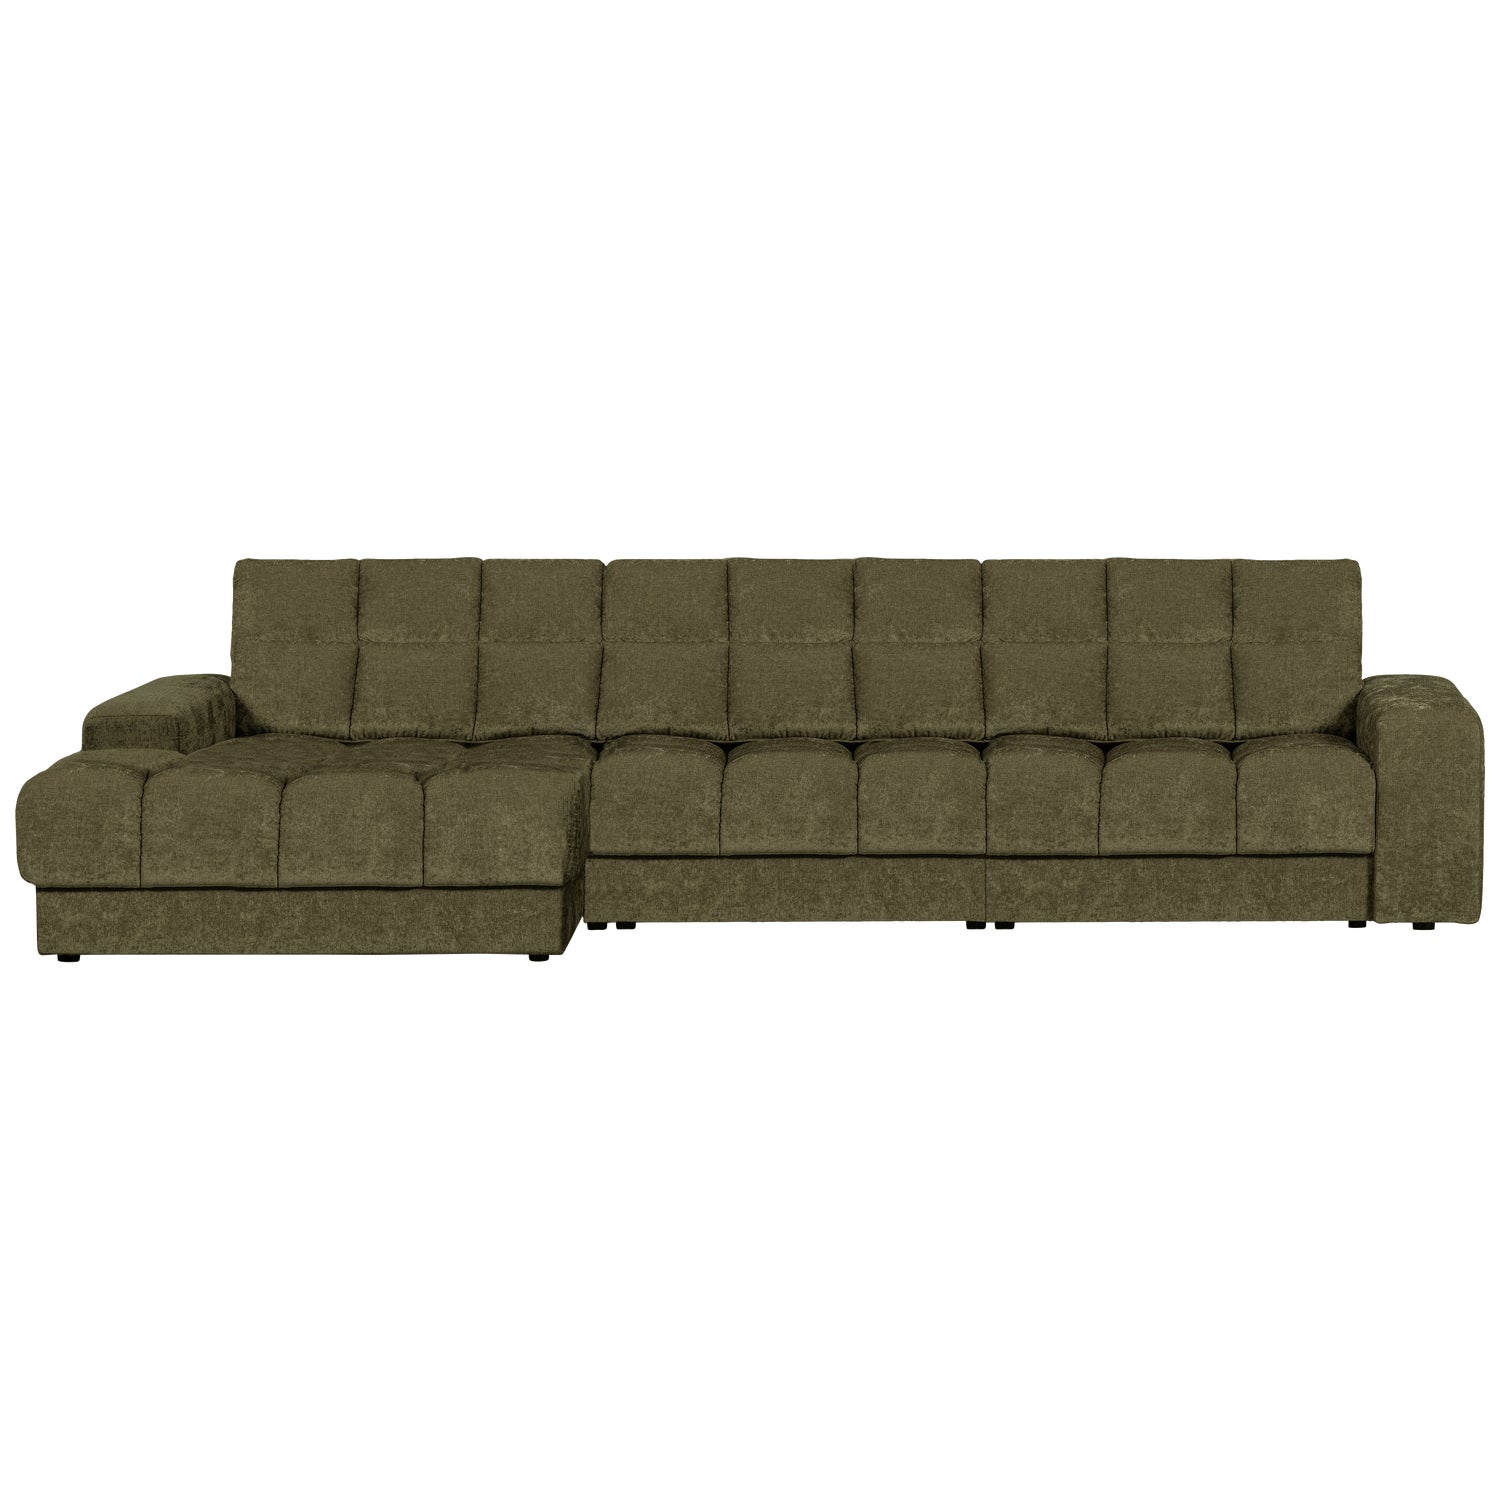 379012-G-01_VS_WE_Second_date_chaise_longue_links_vintage_groen.png?auto=webp&format=png&width=1500&height=1500